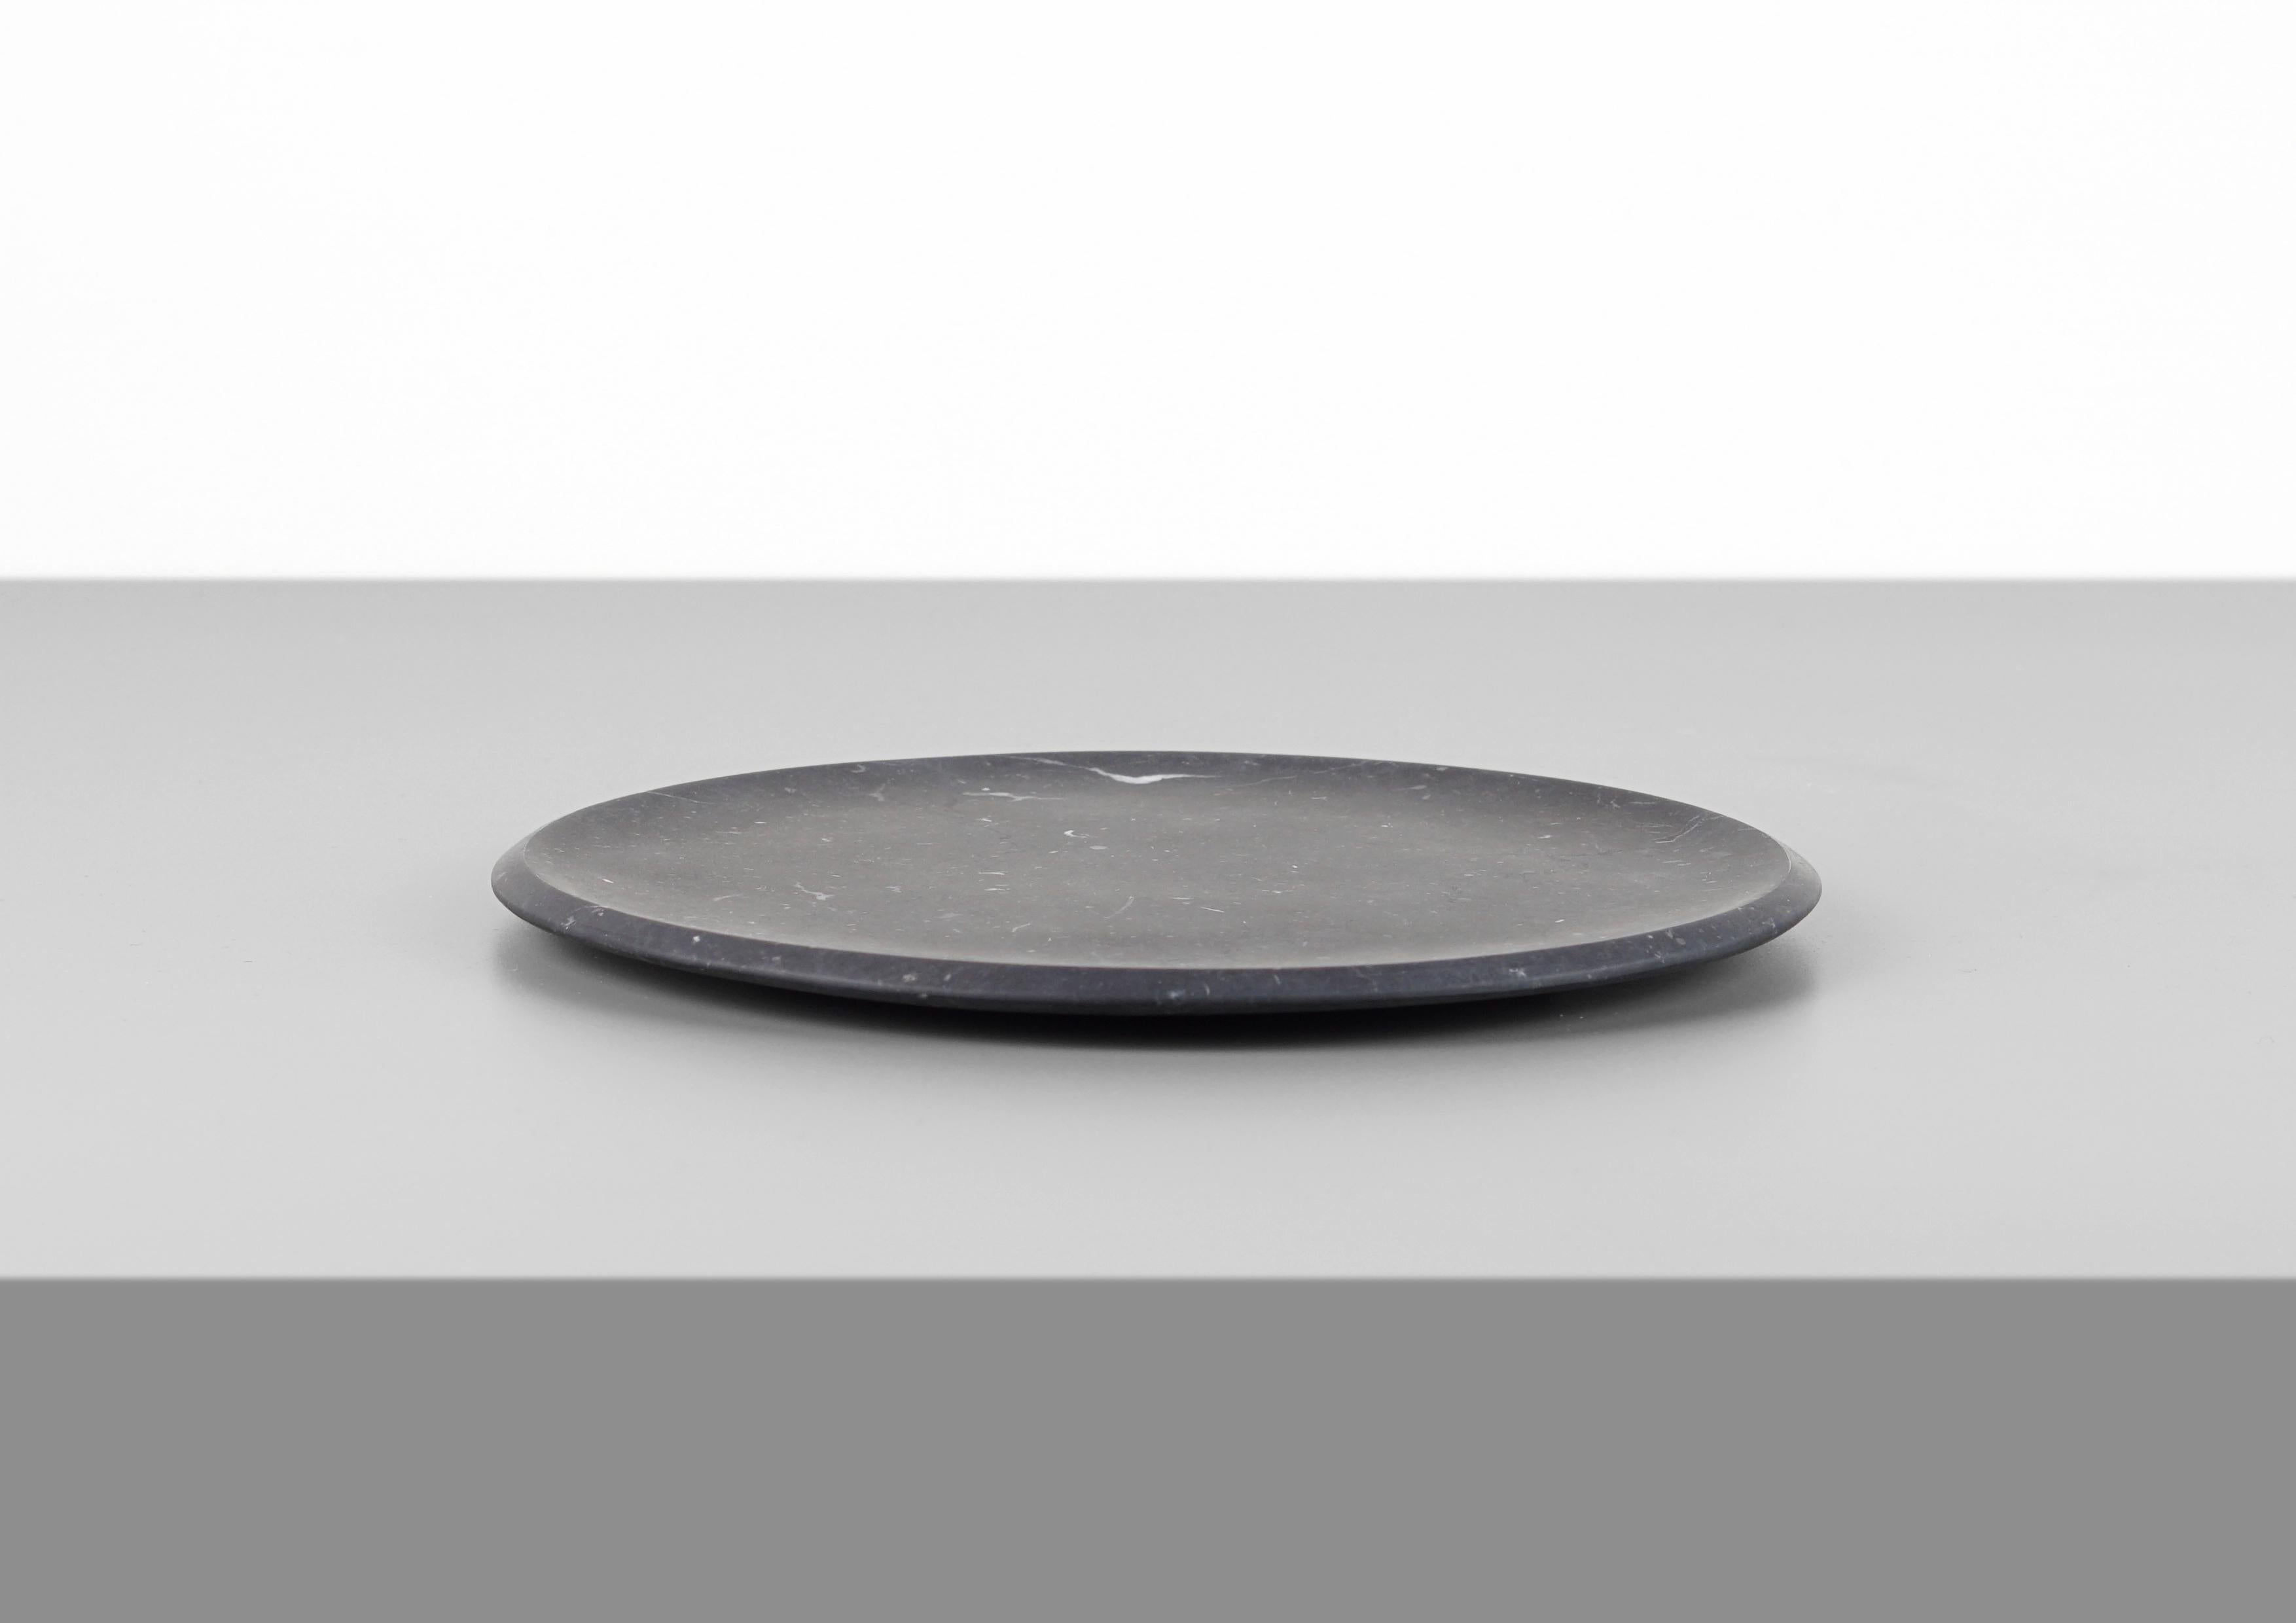 Piatto piano #3 - Side plate - Black by Ivan Colominas
Materia e Tavola Collection
Dimensions: 19 x 1.2 cm
Materials: Nero Marquinia
Also available: Bianco Michelangelo / Bianco Carrara.

The collection is a tribute to one of Italy’s great